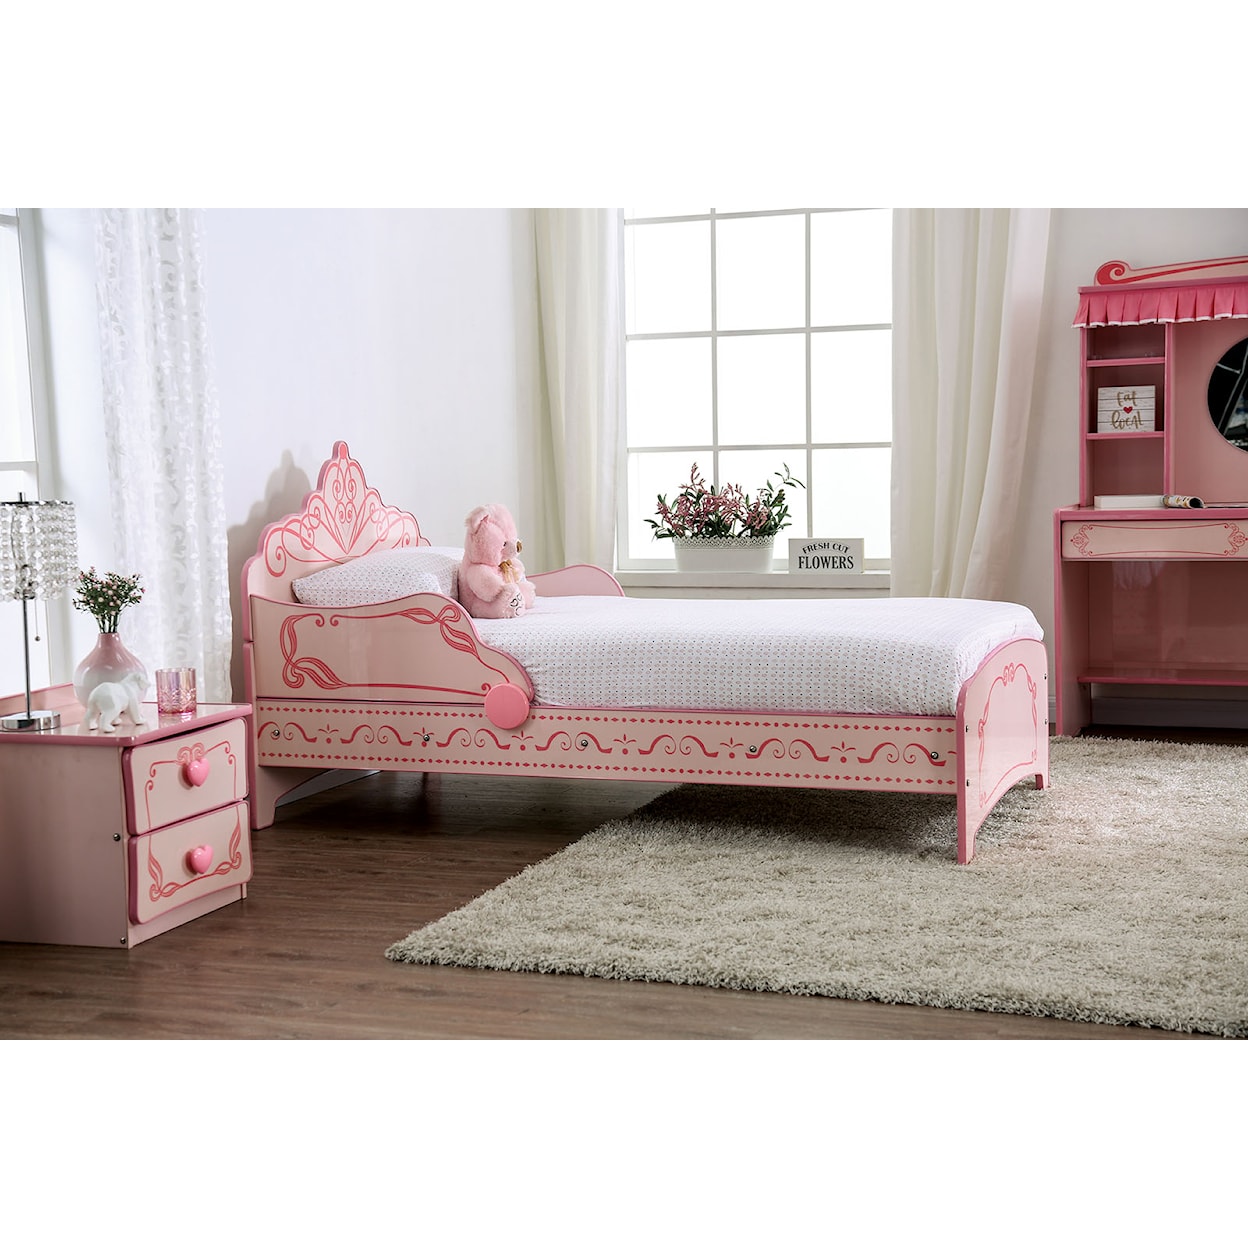 FUSA CM763 Twin Bed